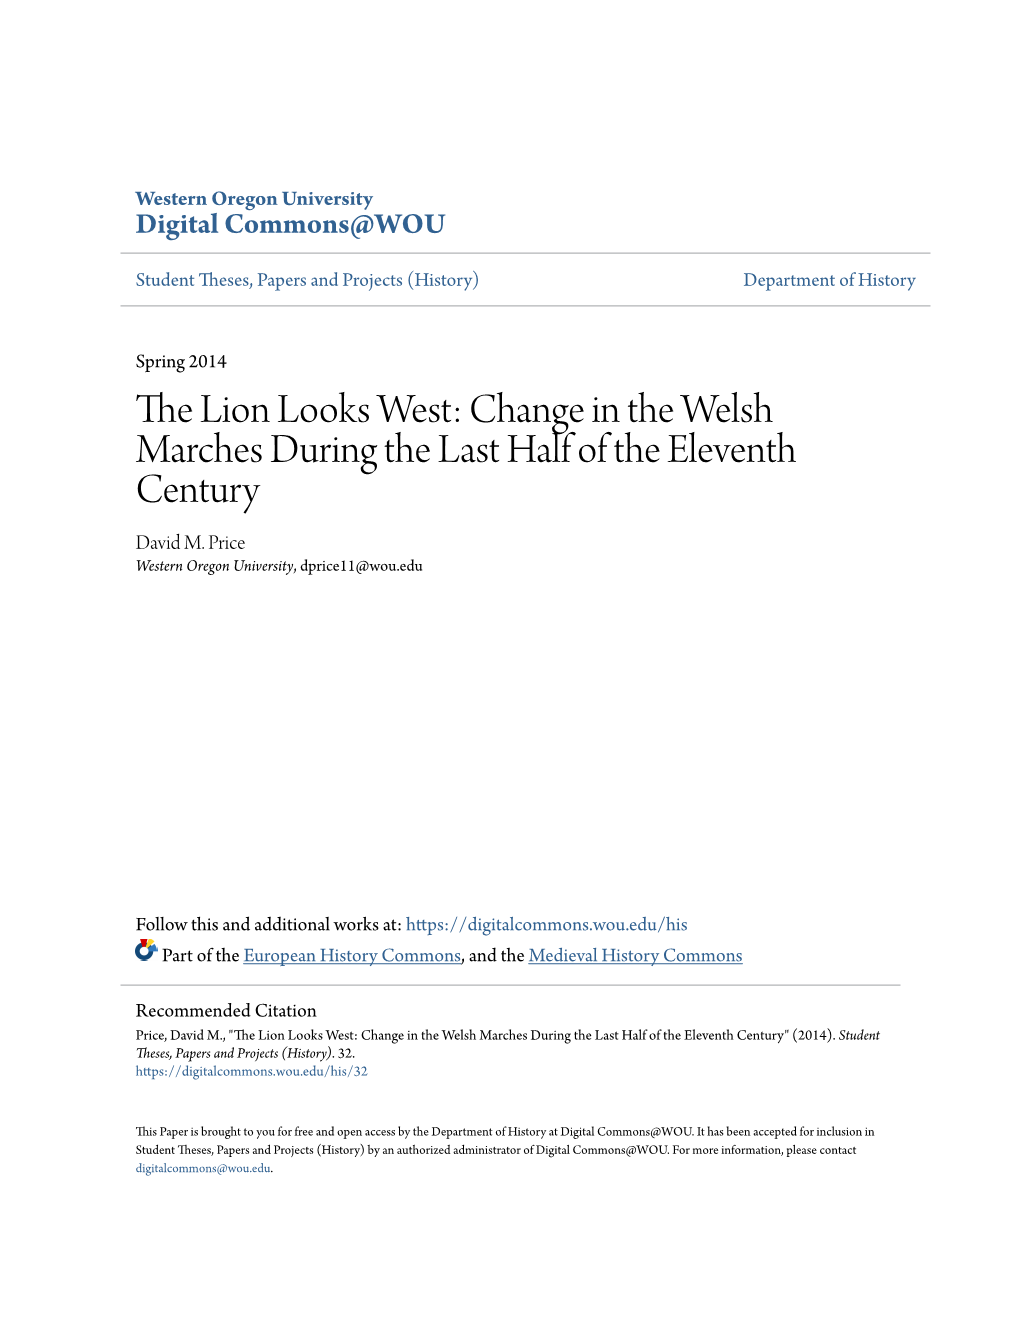 Change in the Welsh Marches During the Last Half of the Eleventh Century David M